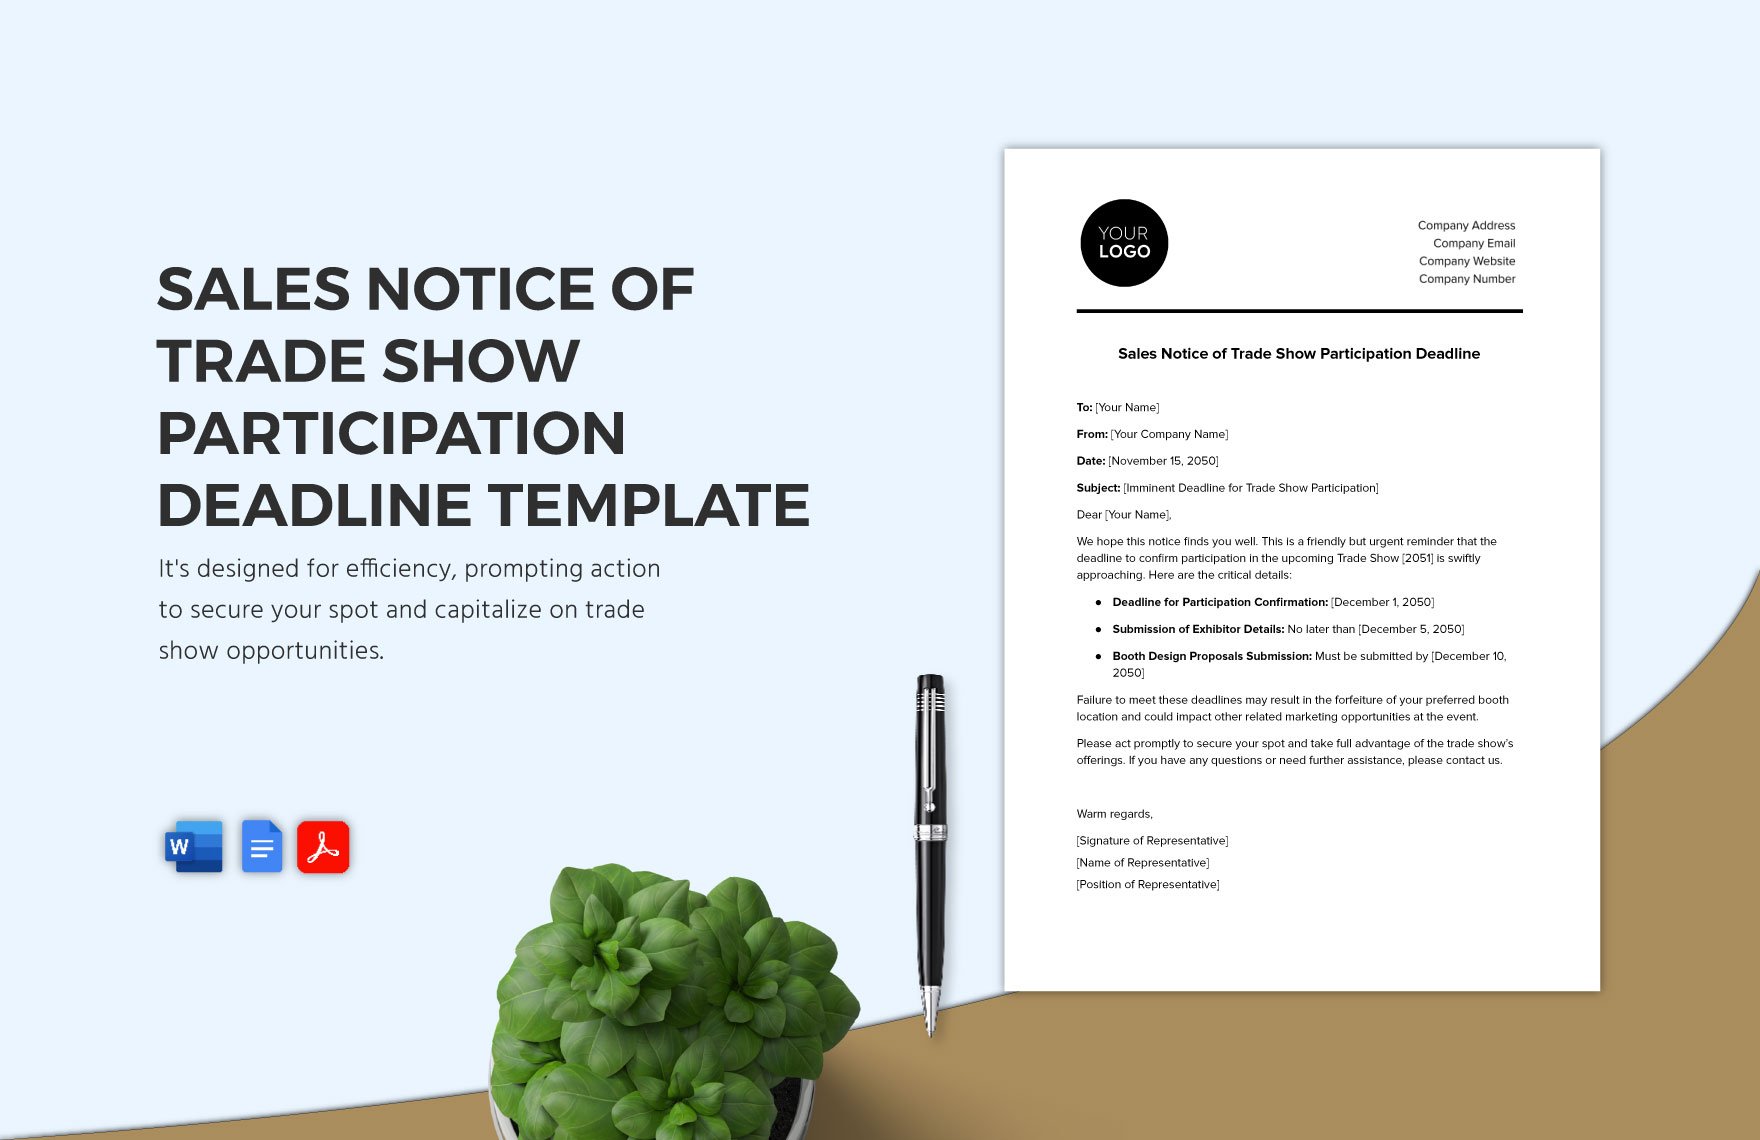 Sales Notice of Trade Show Participation Deadline Template in Word, Google Docs, PDF